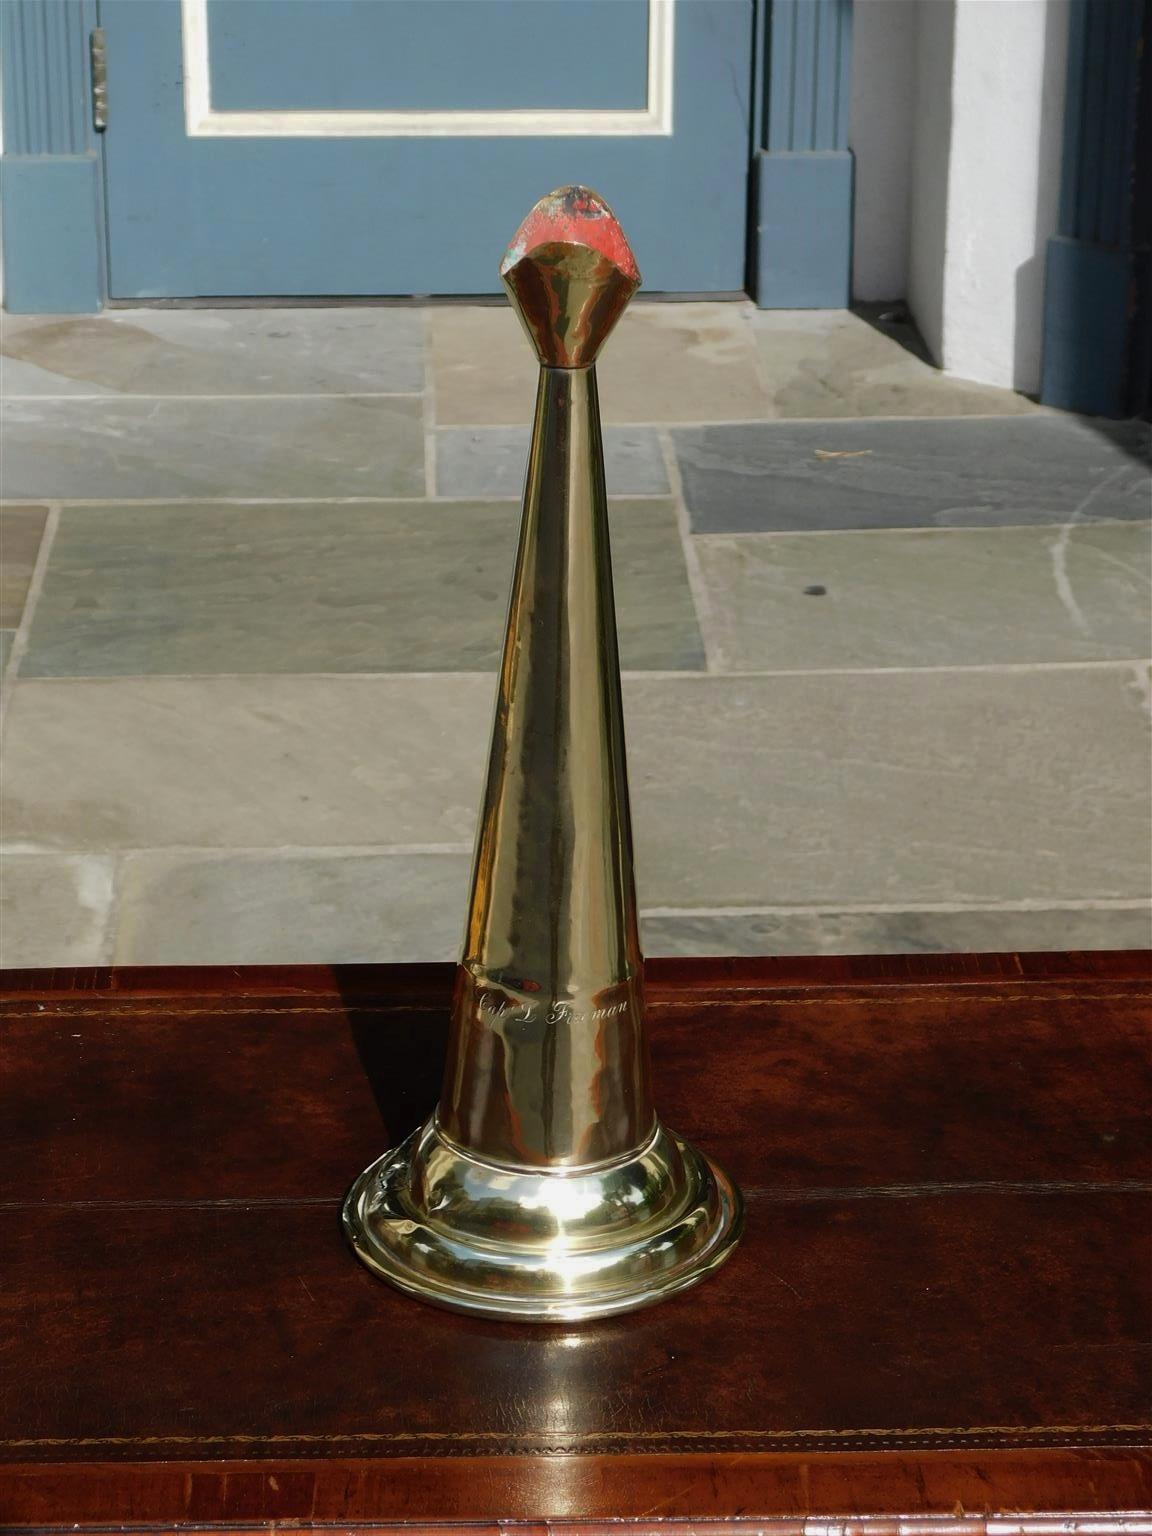 American hand held cast brass engraved Yachtsman's speaking trumpet with bell shaped soldered mouthpiece, coned-shaped column with original interior red paint, and terminating on a rolled molded edge opening, Early-19th century. Trumpet was used to